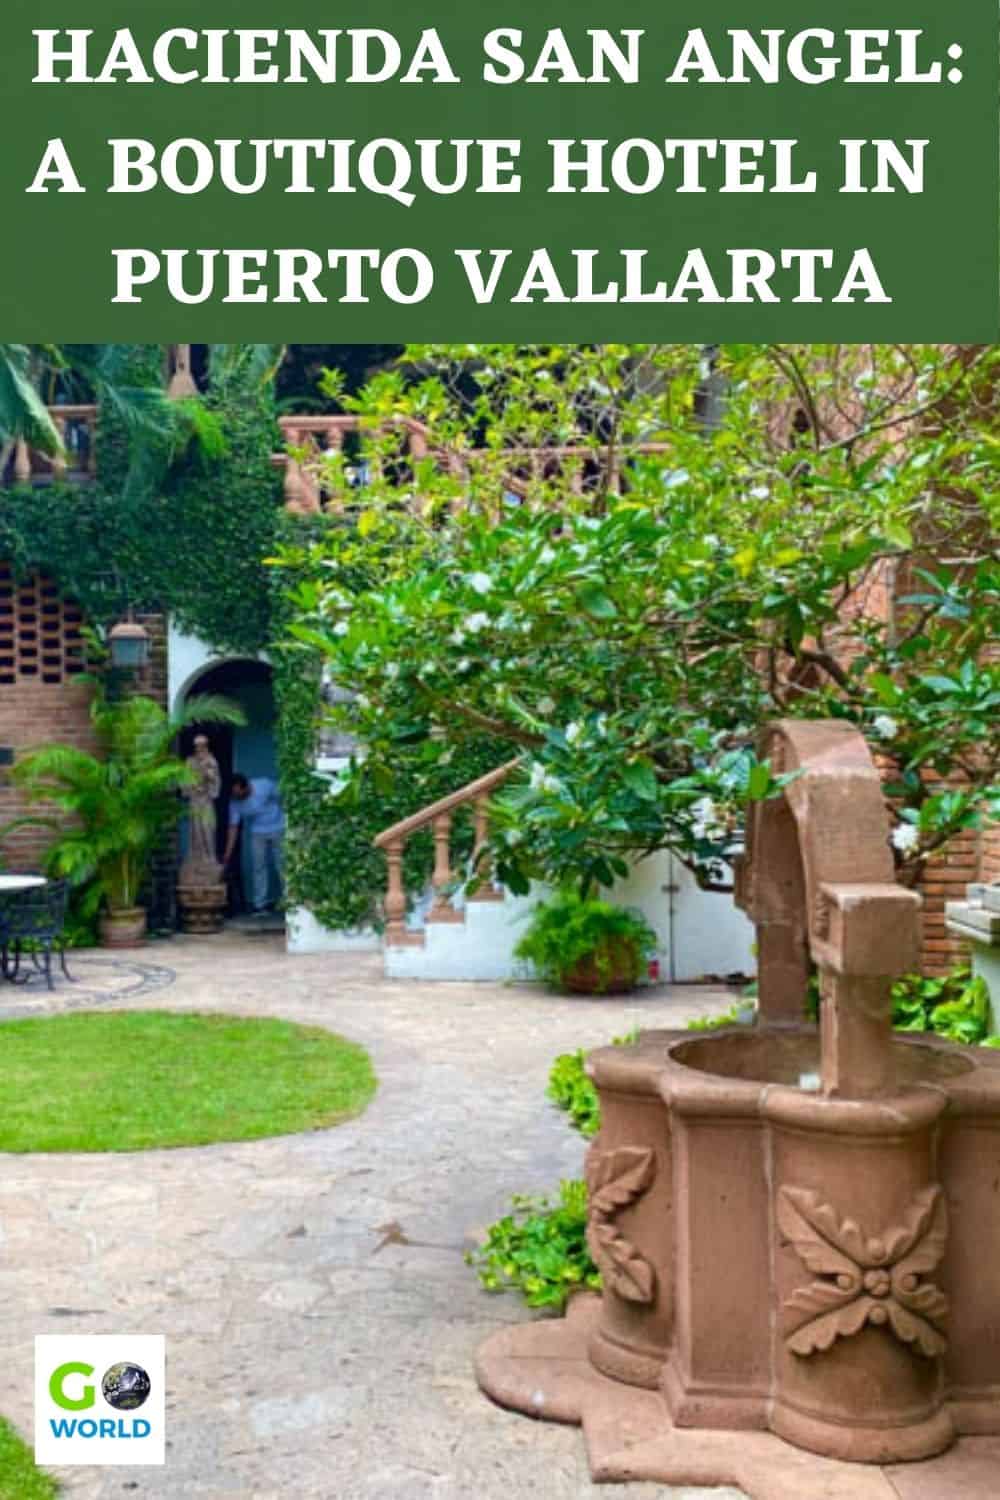 One of the best hotels in Puerto Vallarta is Hacienda San Angel, a gorgeous boutique hotel with stunning views, once home to Richard Burton. #PuertoVallarta #besthotelsinpuertovallarta